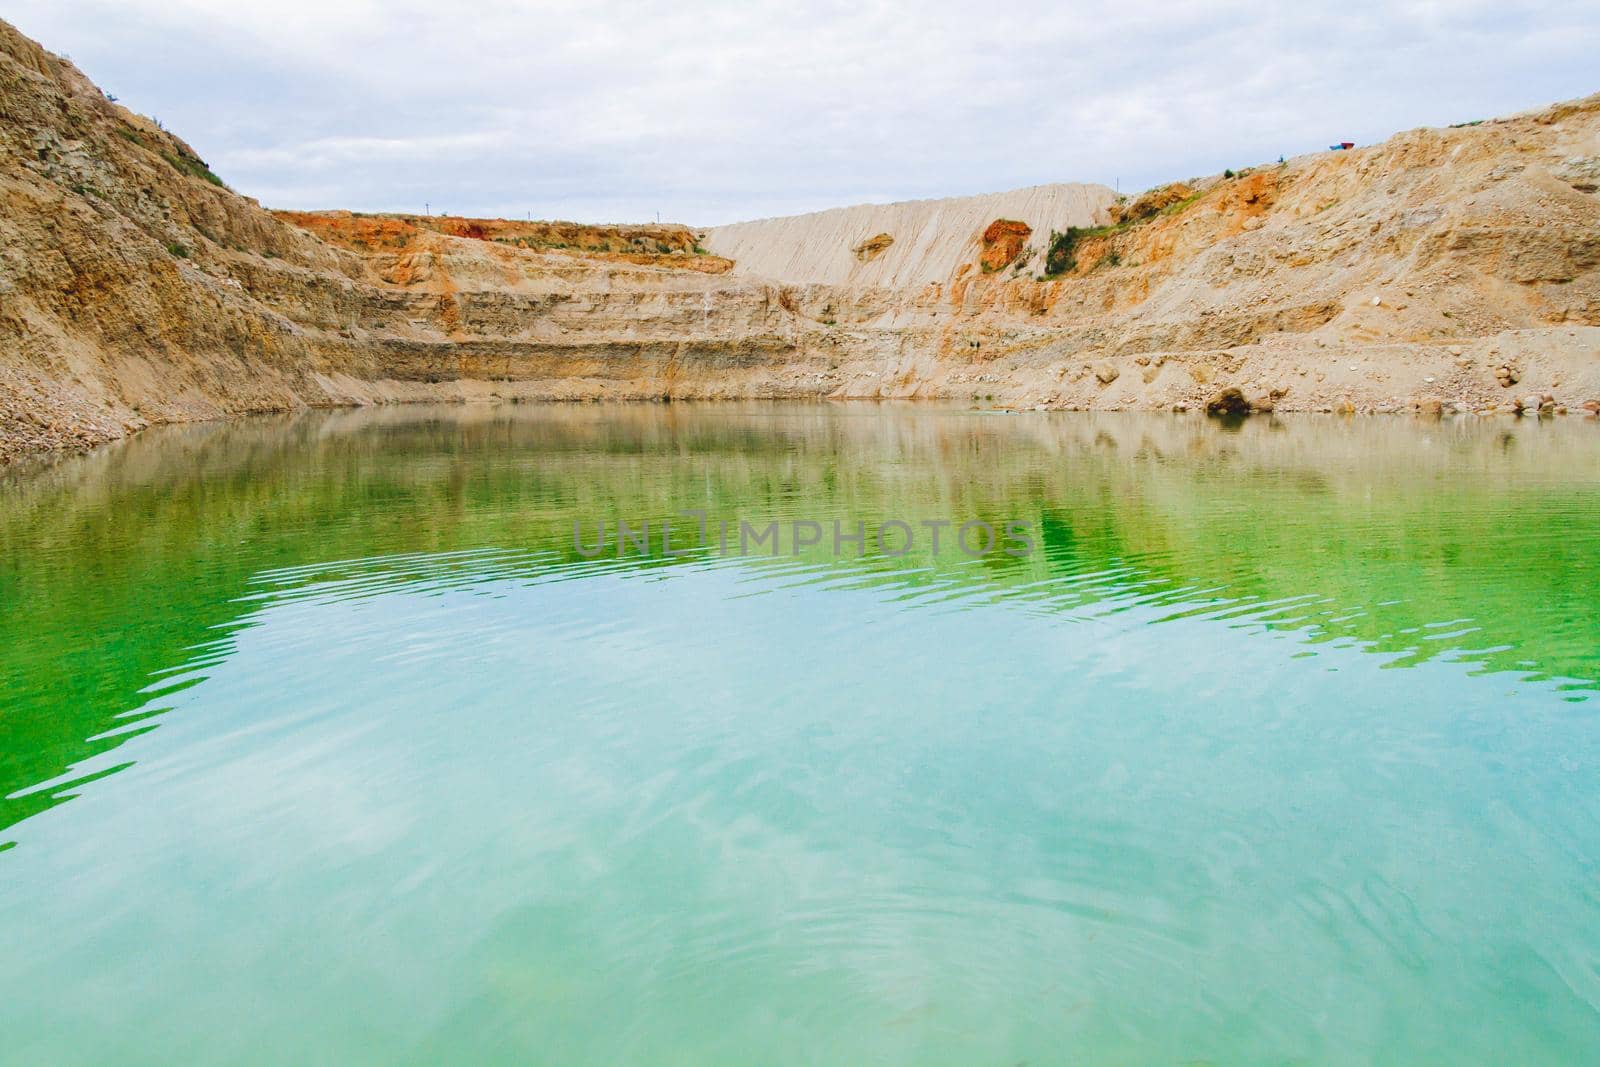 Lake formation in an old abandoned quarry. Termination of mining operations. by Verrone